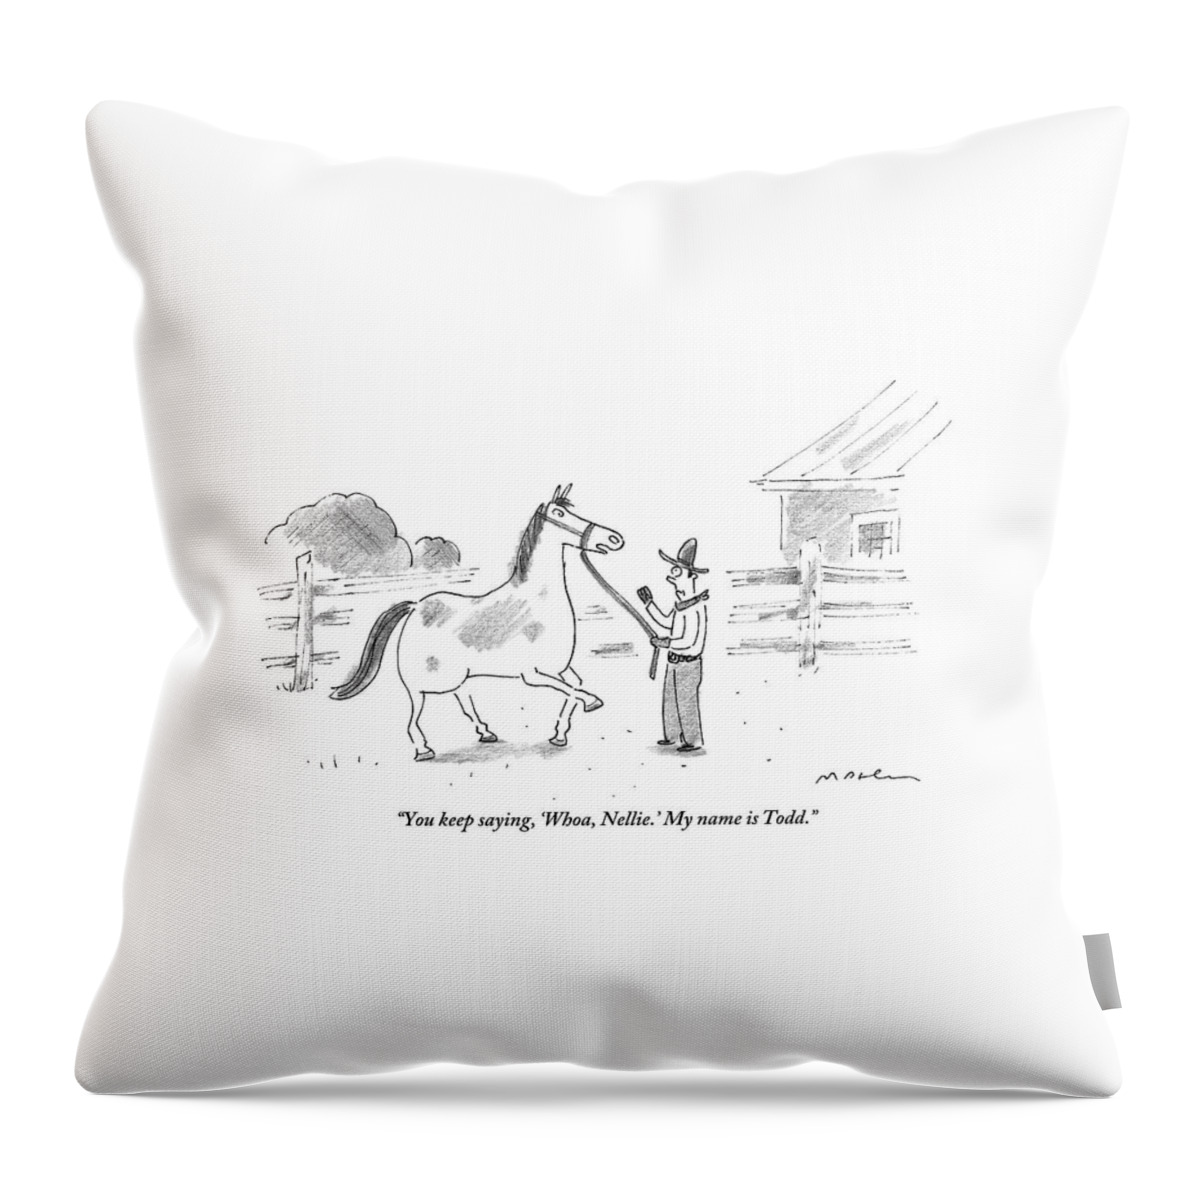 A Horse Speaks To A Cowboy Trying To Calm Throw Pillow